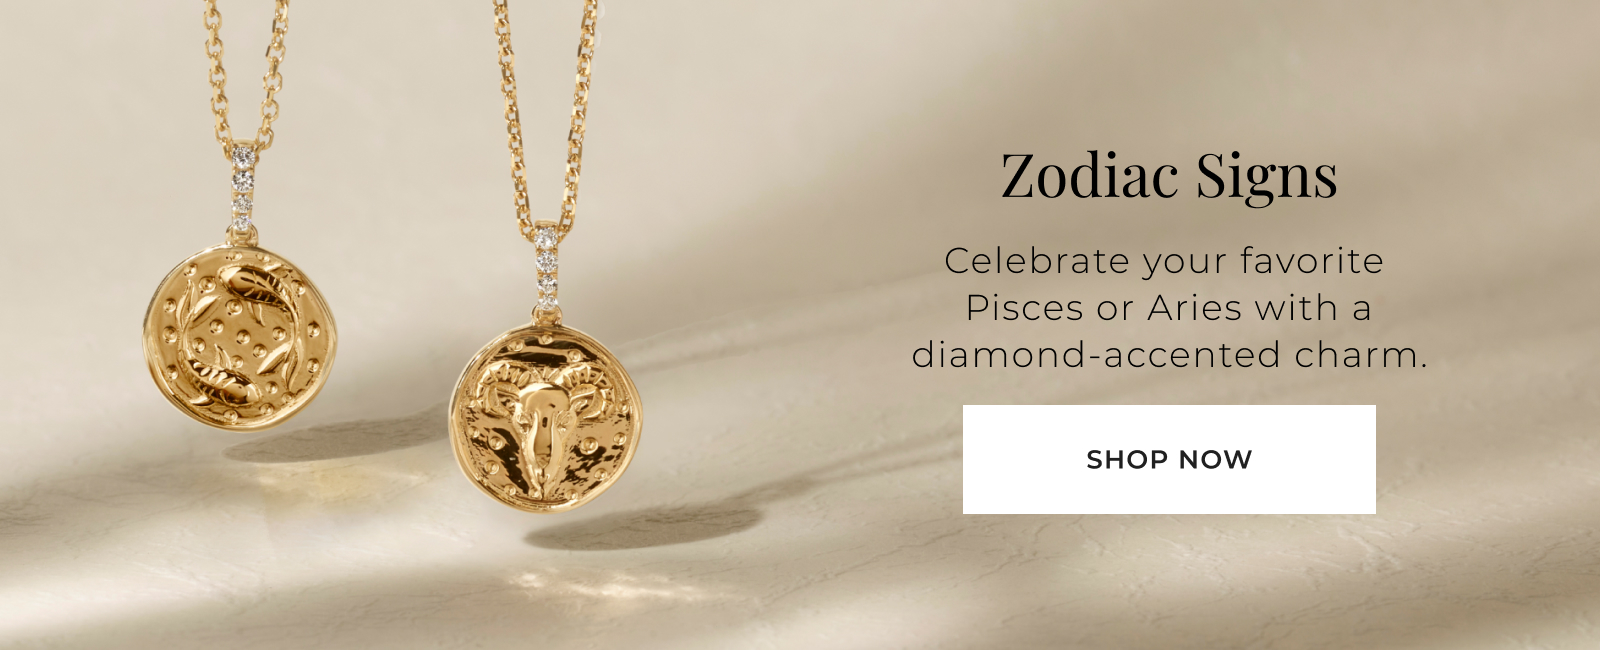 Zodiac Signs - Celebrate your favorite Pisces or Aries with a diamond-accented charm. Shop Now >